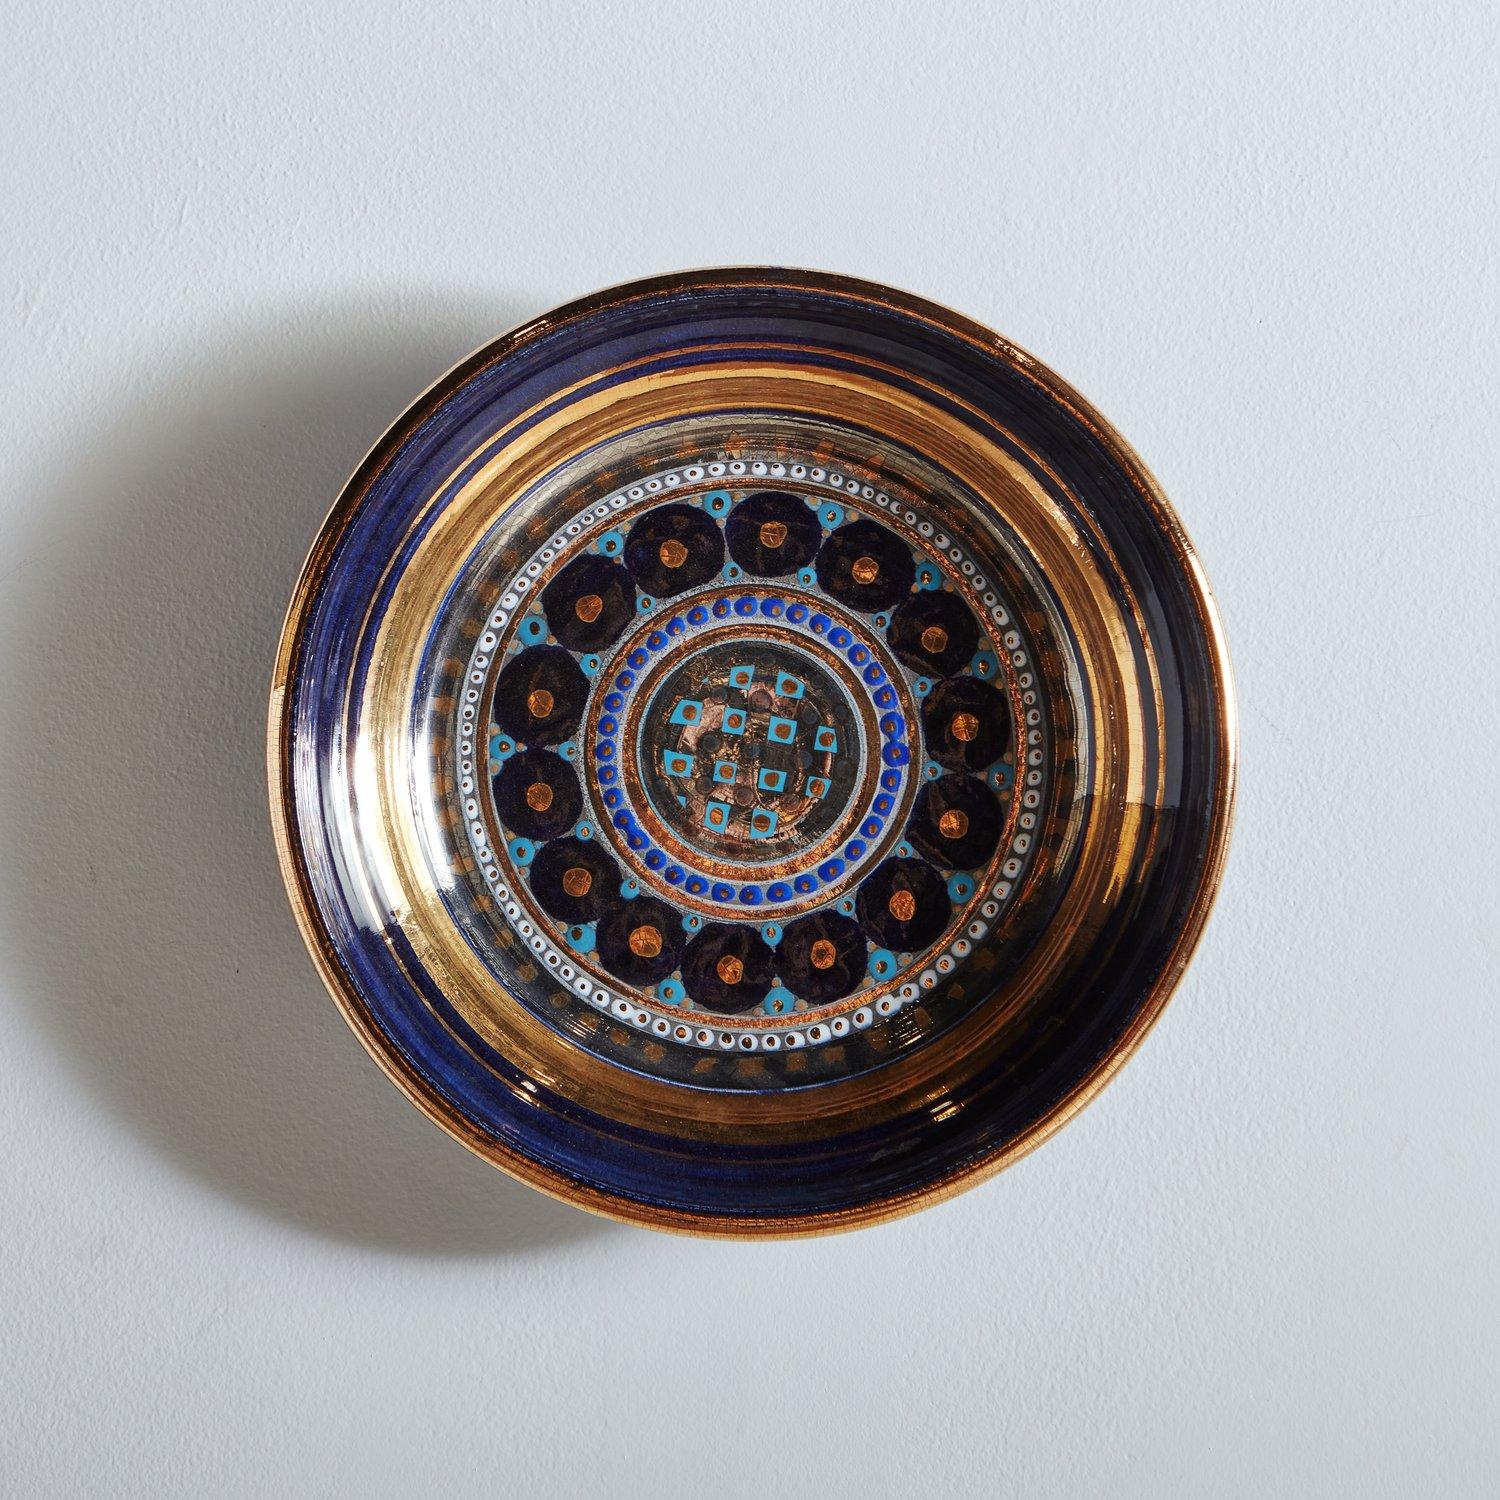 A mid-century glazed ceramic bowl by French ceramicist Georges Pelletier. This piece has a beautiful range of blue, black and gold hues in a circular geometric pattern. Signature on bottom. This piece can be displayed on a tabletop or hung on the